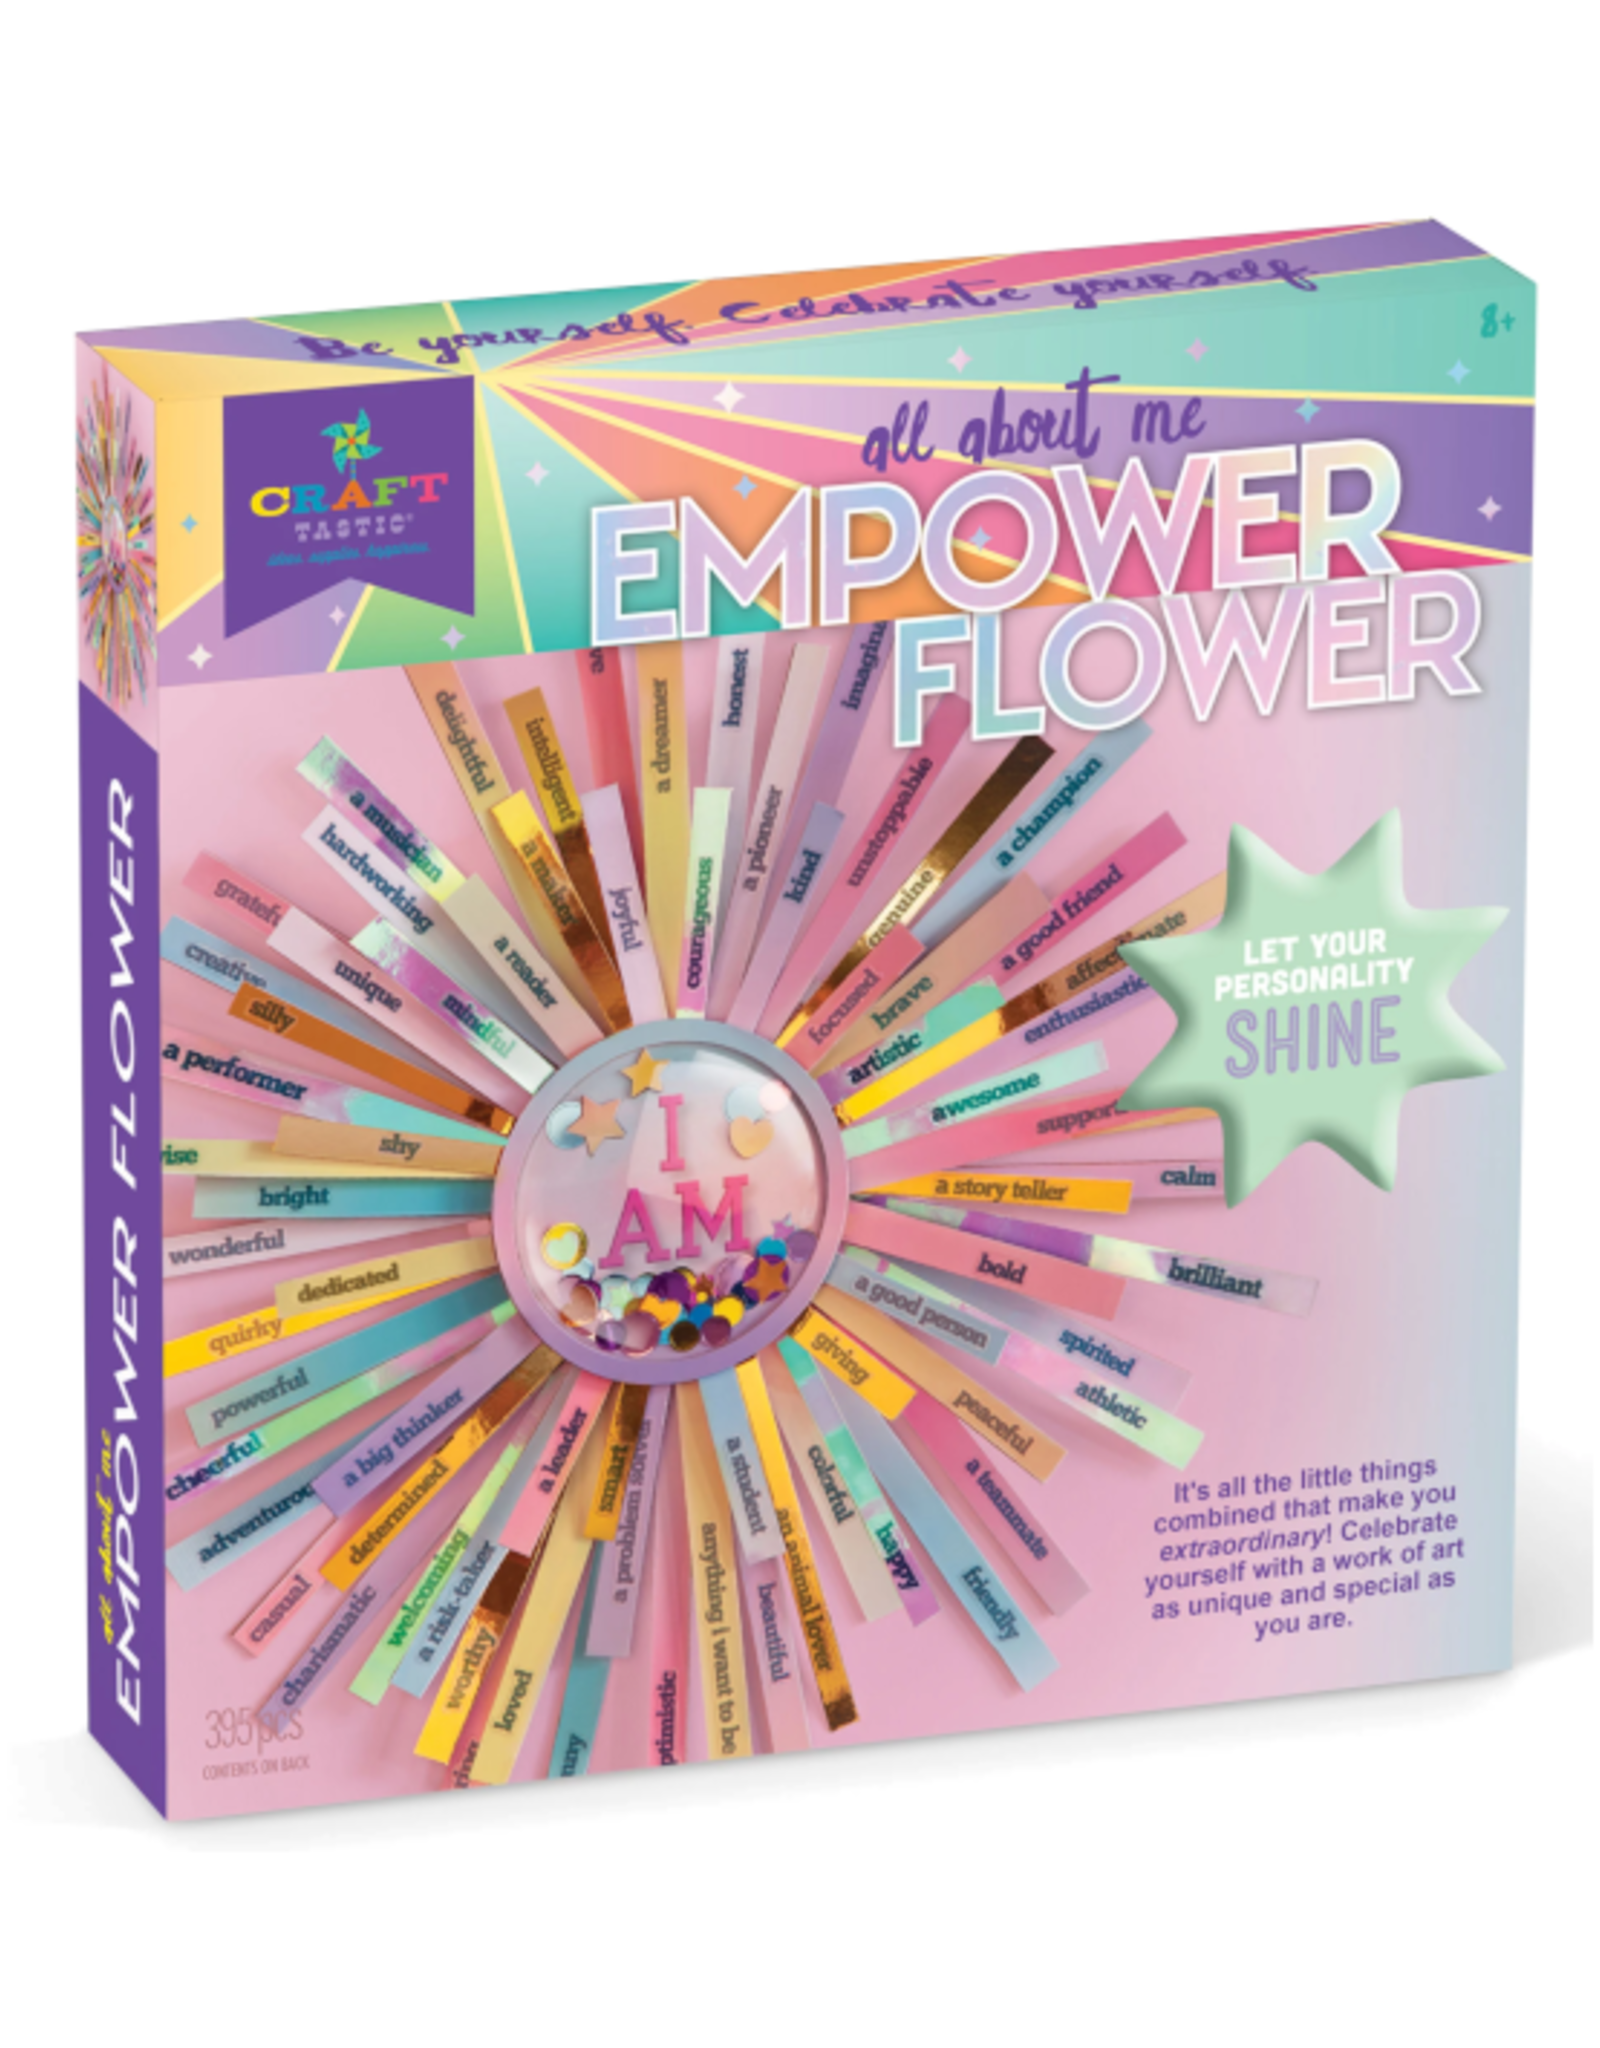 Craft Tastic - All About Me Empower Flower